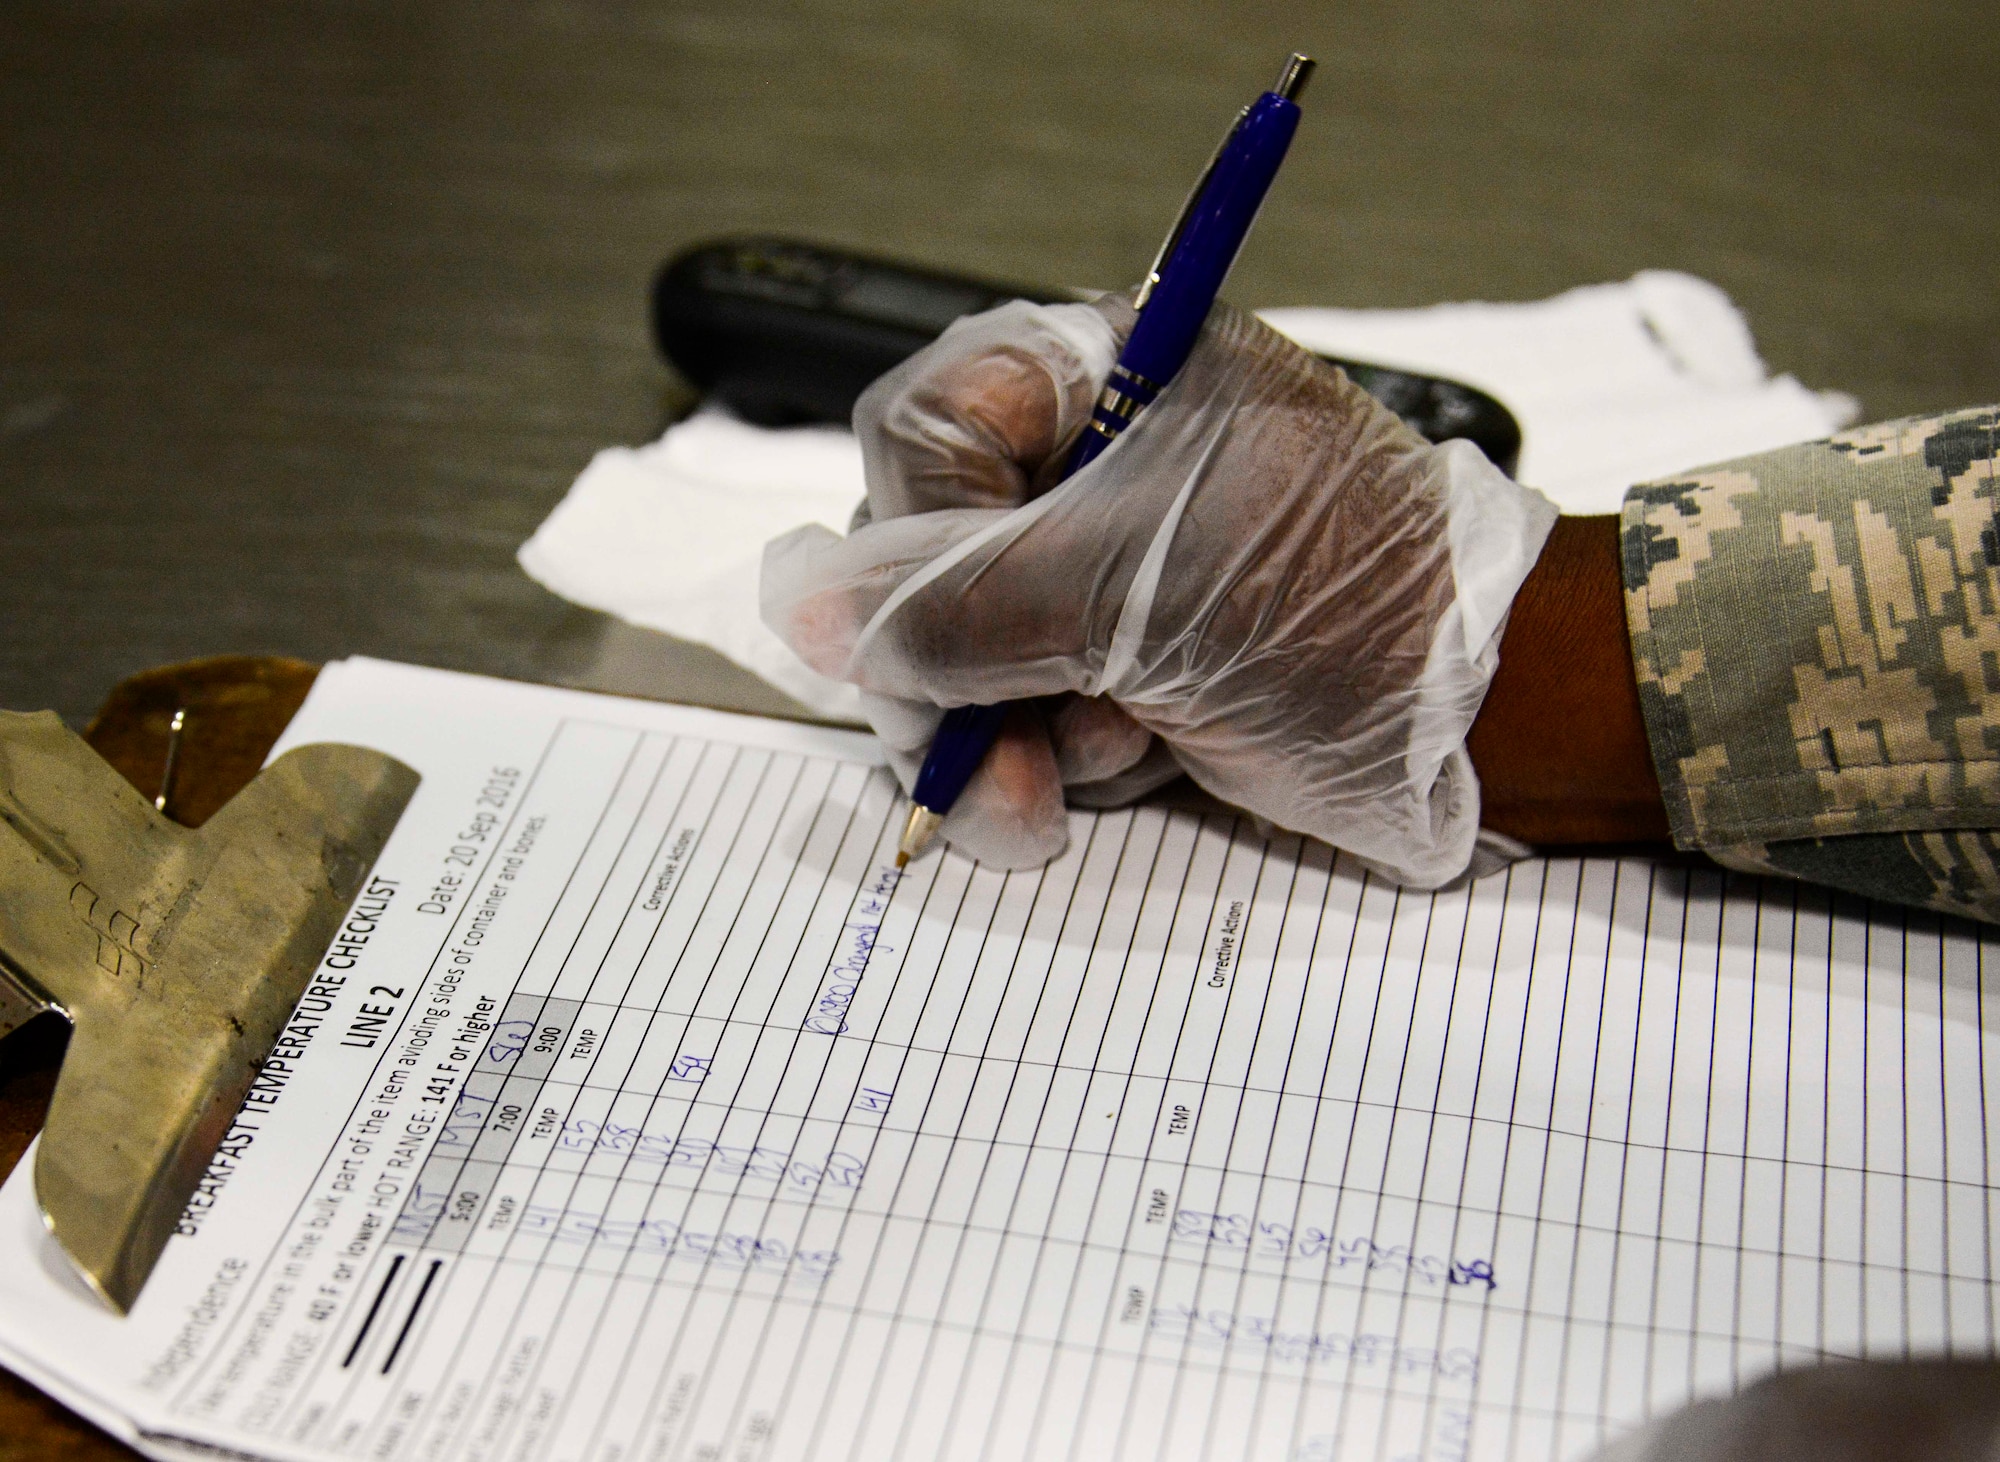 Airman 1st Class Shanette Whitehead, 379th Expeditionary Force Support Squadron service journeyman, records the food temperature on a temperature check sheet in the Independence Dining Facility Sept. 20, 2016, at Al Udeid Air Base, Qatar. Service journeymen are required to conduct temperature checks every two hours and record any corrective actions that were taken when they find food at an improper temperature. (U.S. Air Force photo/Senior Airman Janelle Patiño/Released)